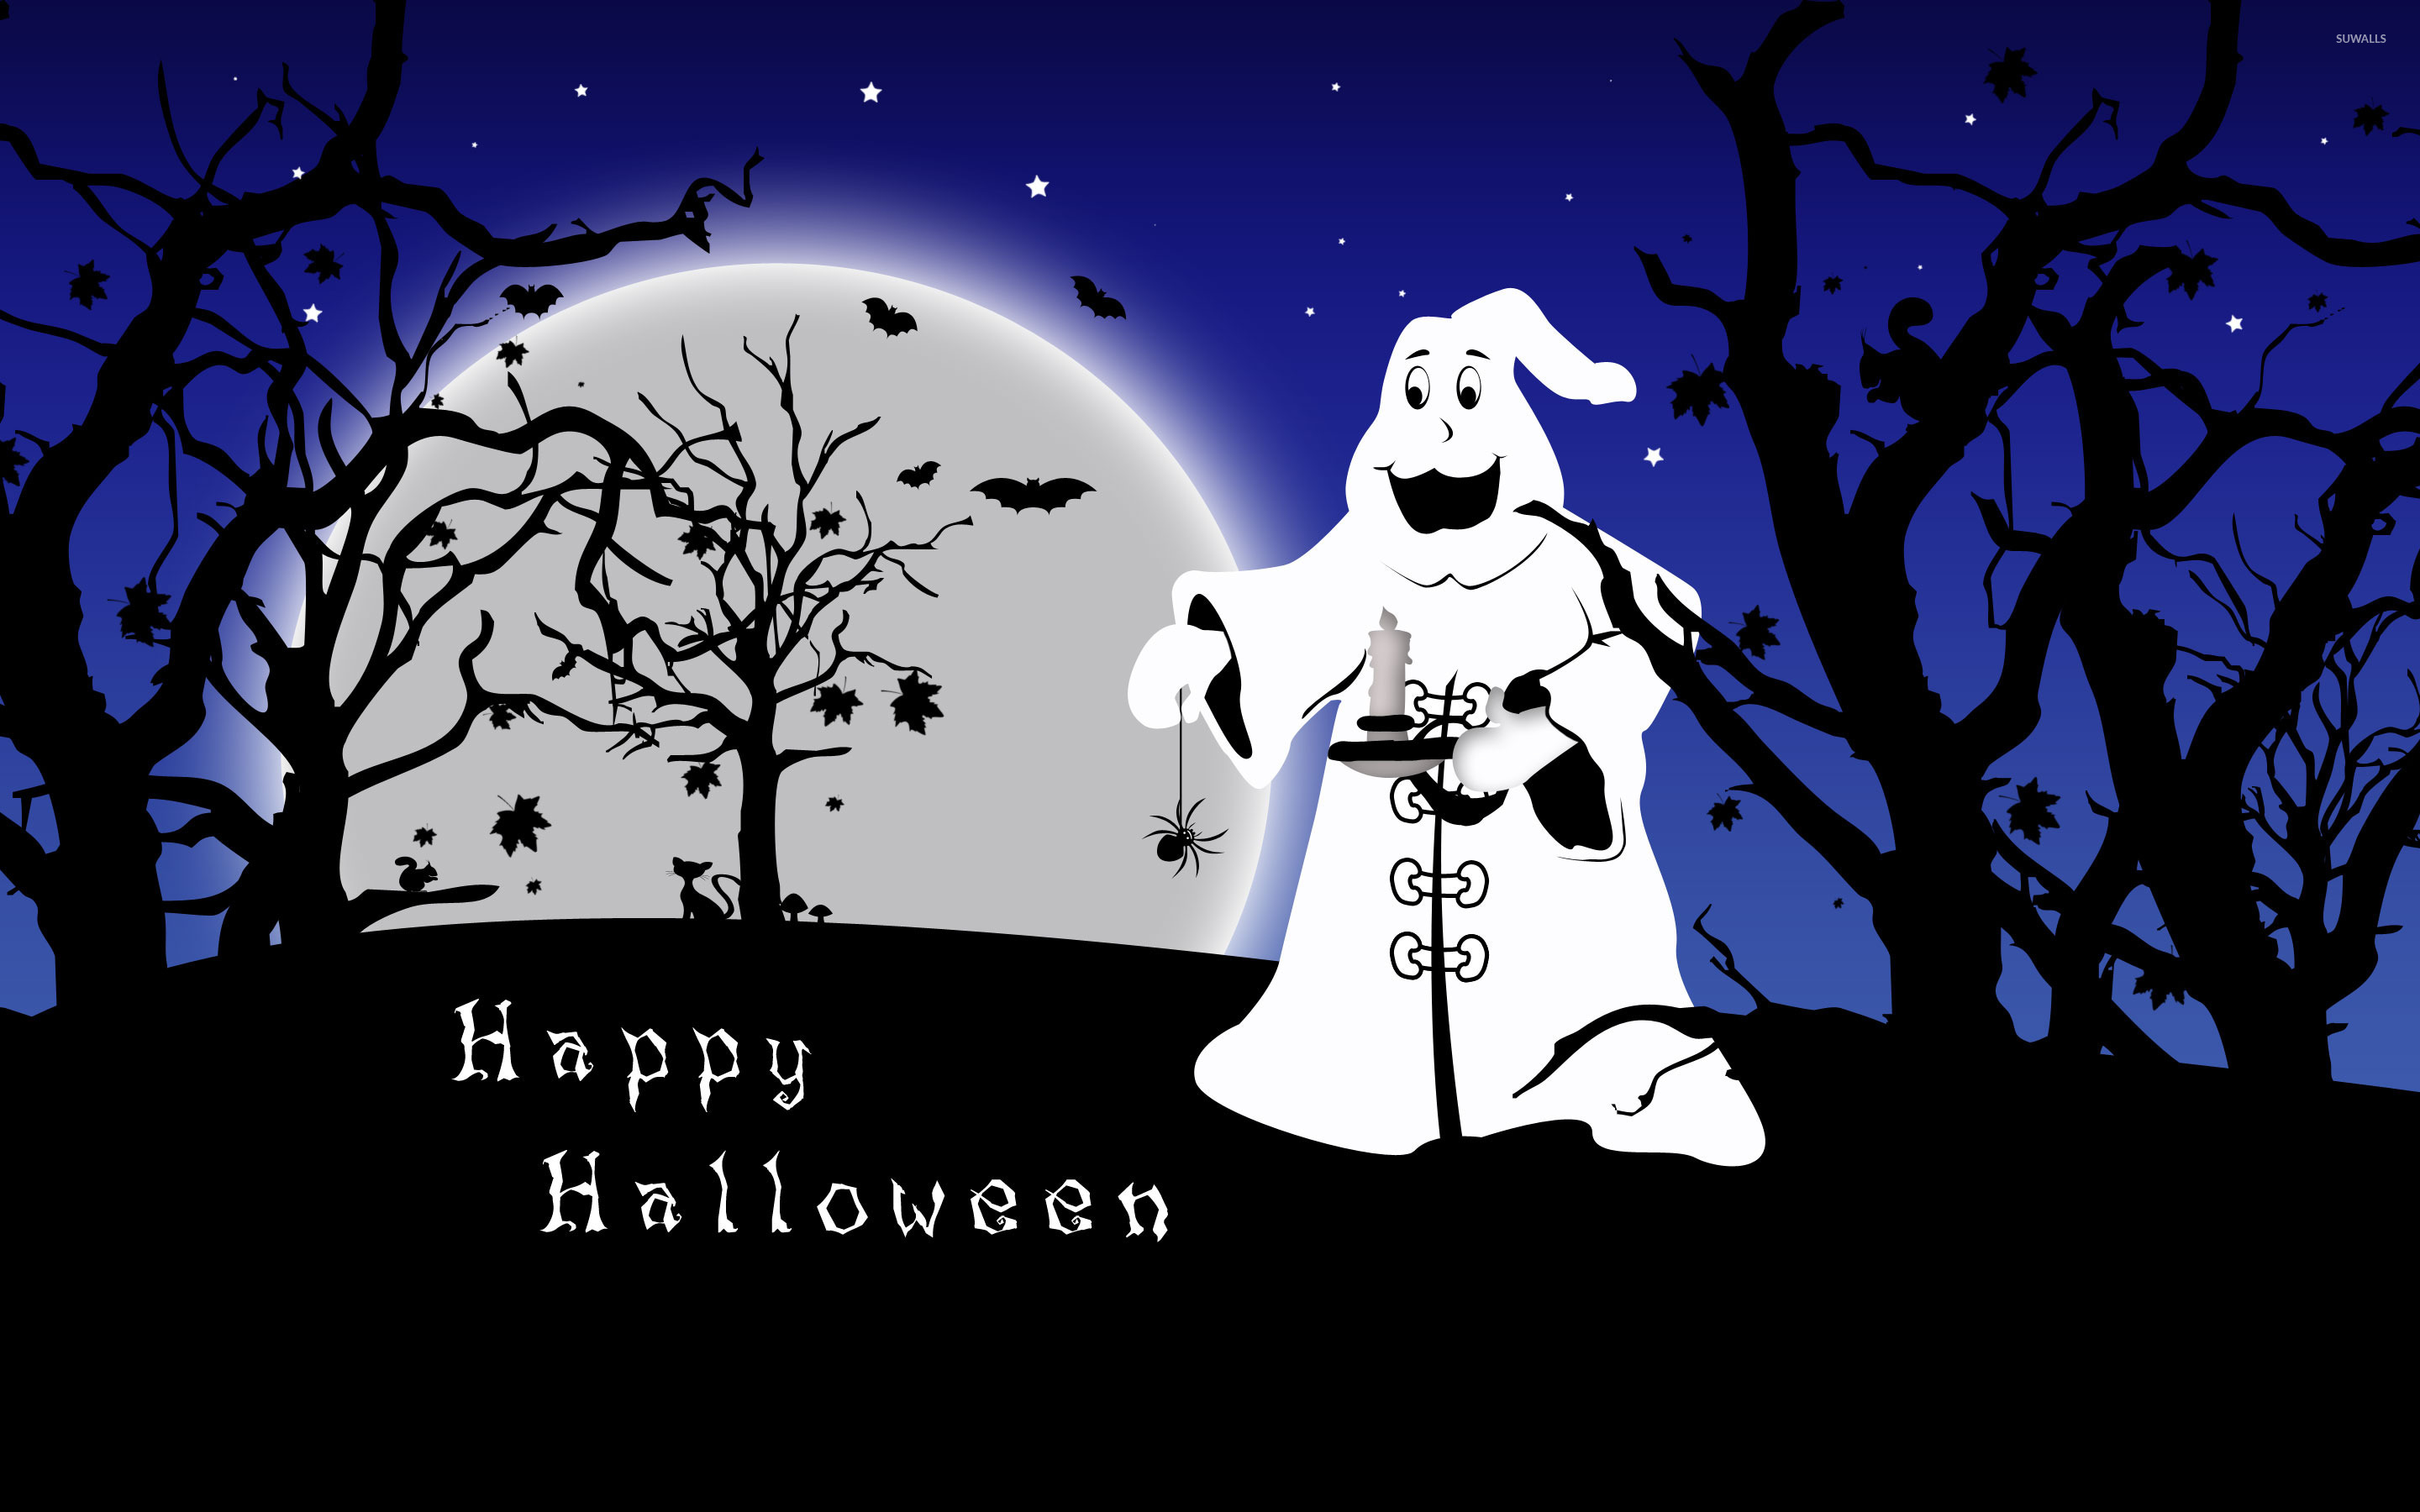 Ghost under the full moon wallpaper - Holiday wallpapers - #24271